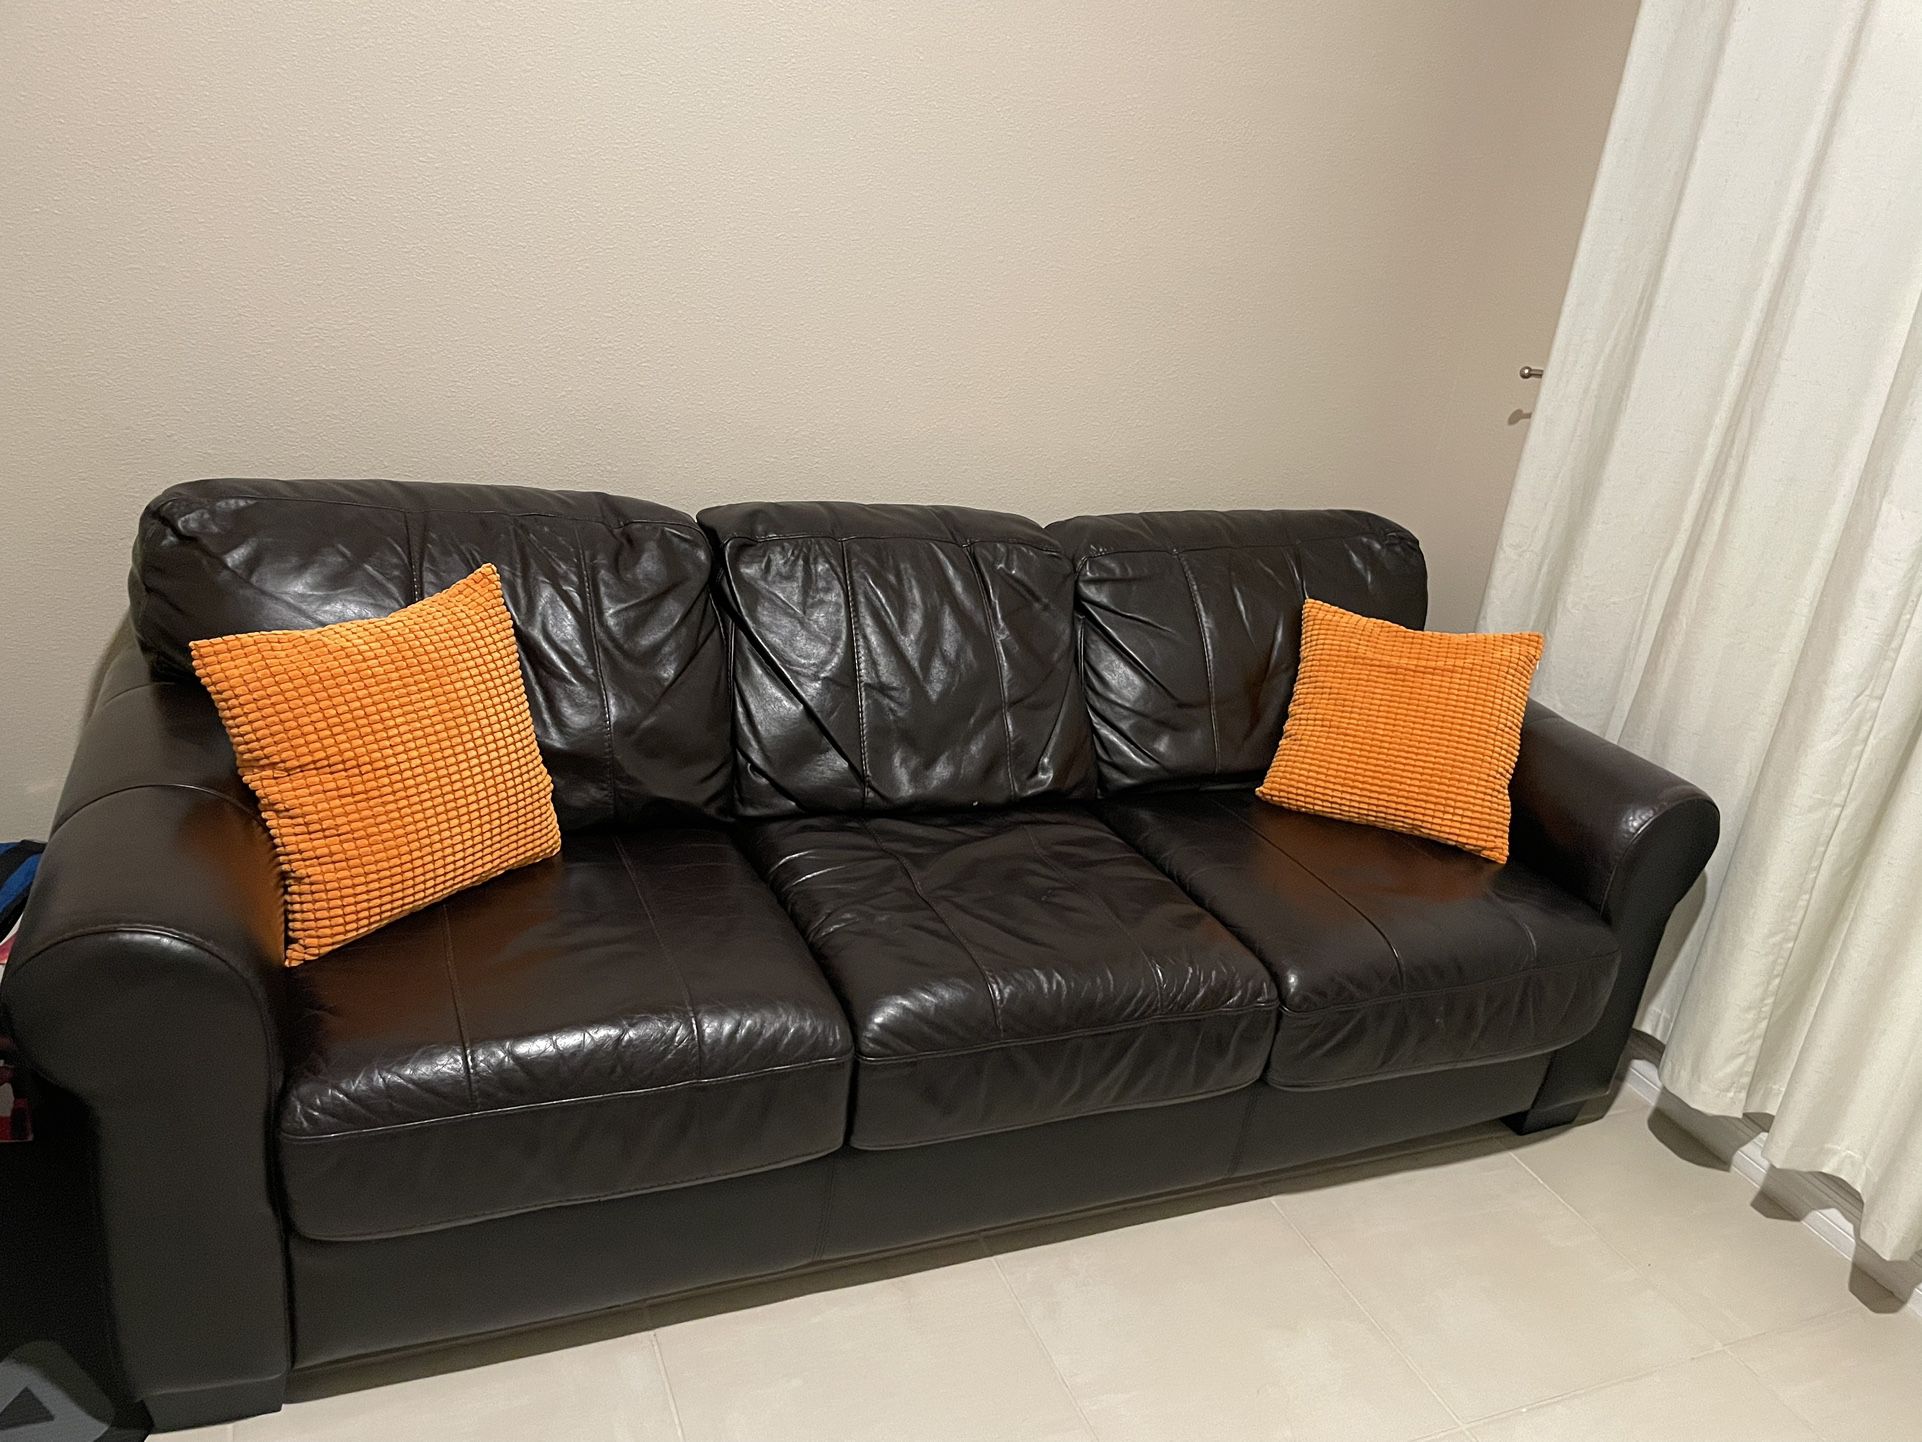 QUEEN LEATHER SOFA BED!